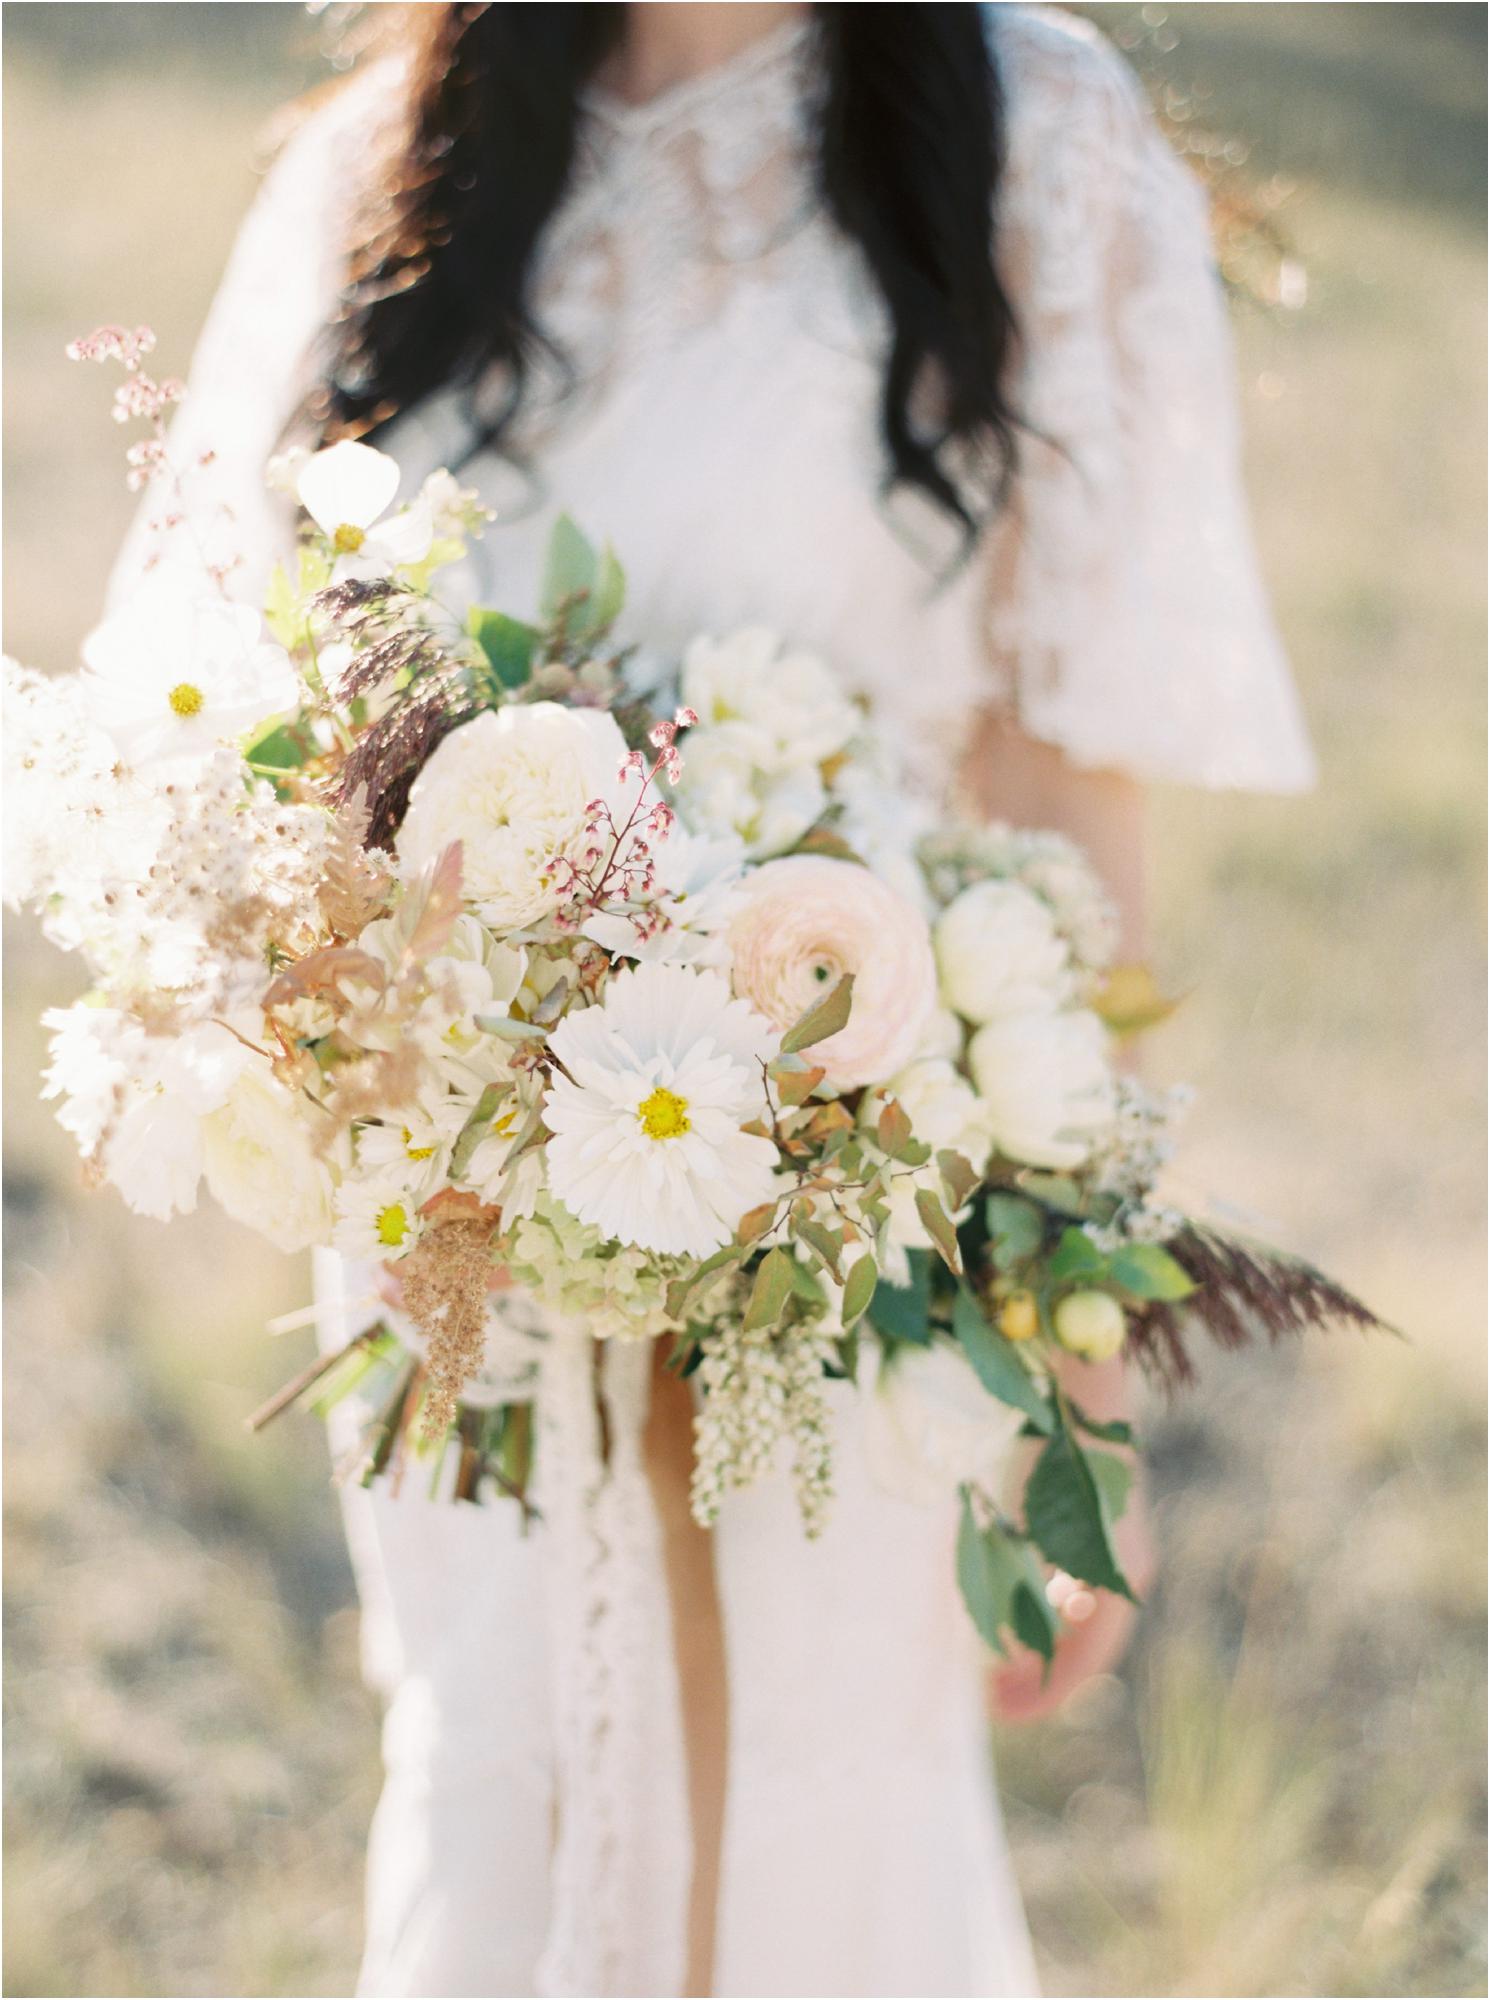  Legends of the Fall inspired Montana Wedding at the Resort at Paws Up  Design and Florals by Greenwood Events  http://www.greenwood.events/   &nbsp;©Jeremiah and Rachel Photography  http://jeremiahandrachel.com  